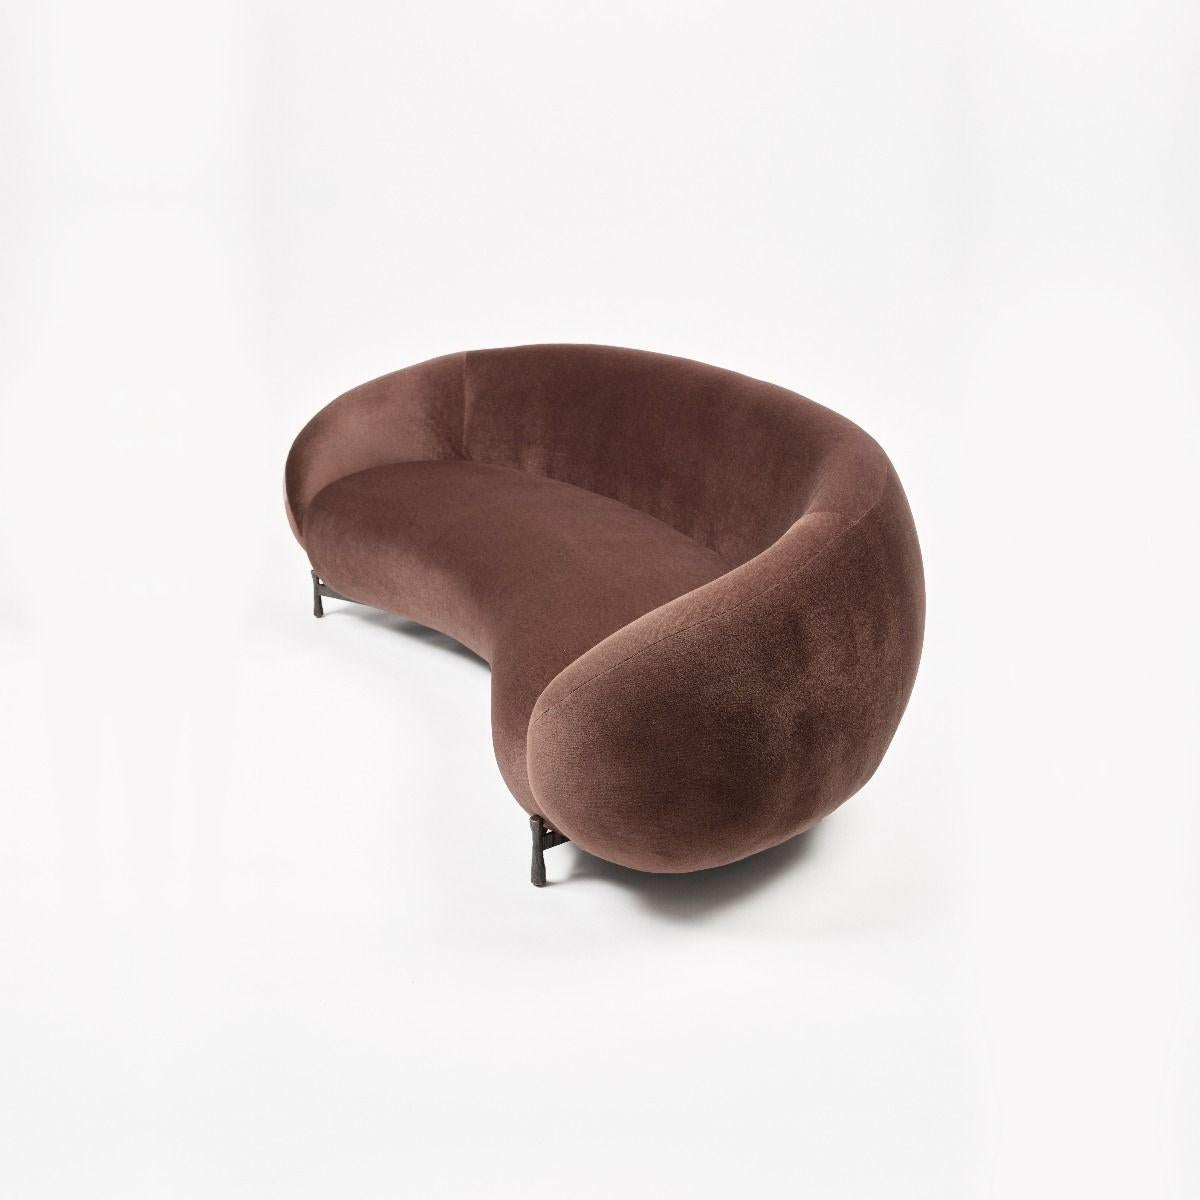 MATERIALS
Shown in mohair upholstery, hammered steel frame.

HANDMADE IN CANADA

PRICING + COM
This Paolo Ferrari design is priced to accommodate customer’s own material (COM).
A limited range of fabrics is available from Studio Paolo Ferrari at an